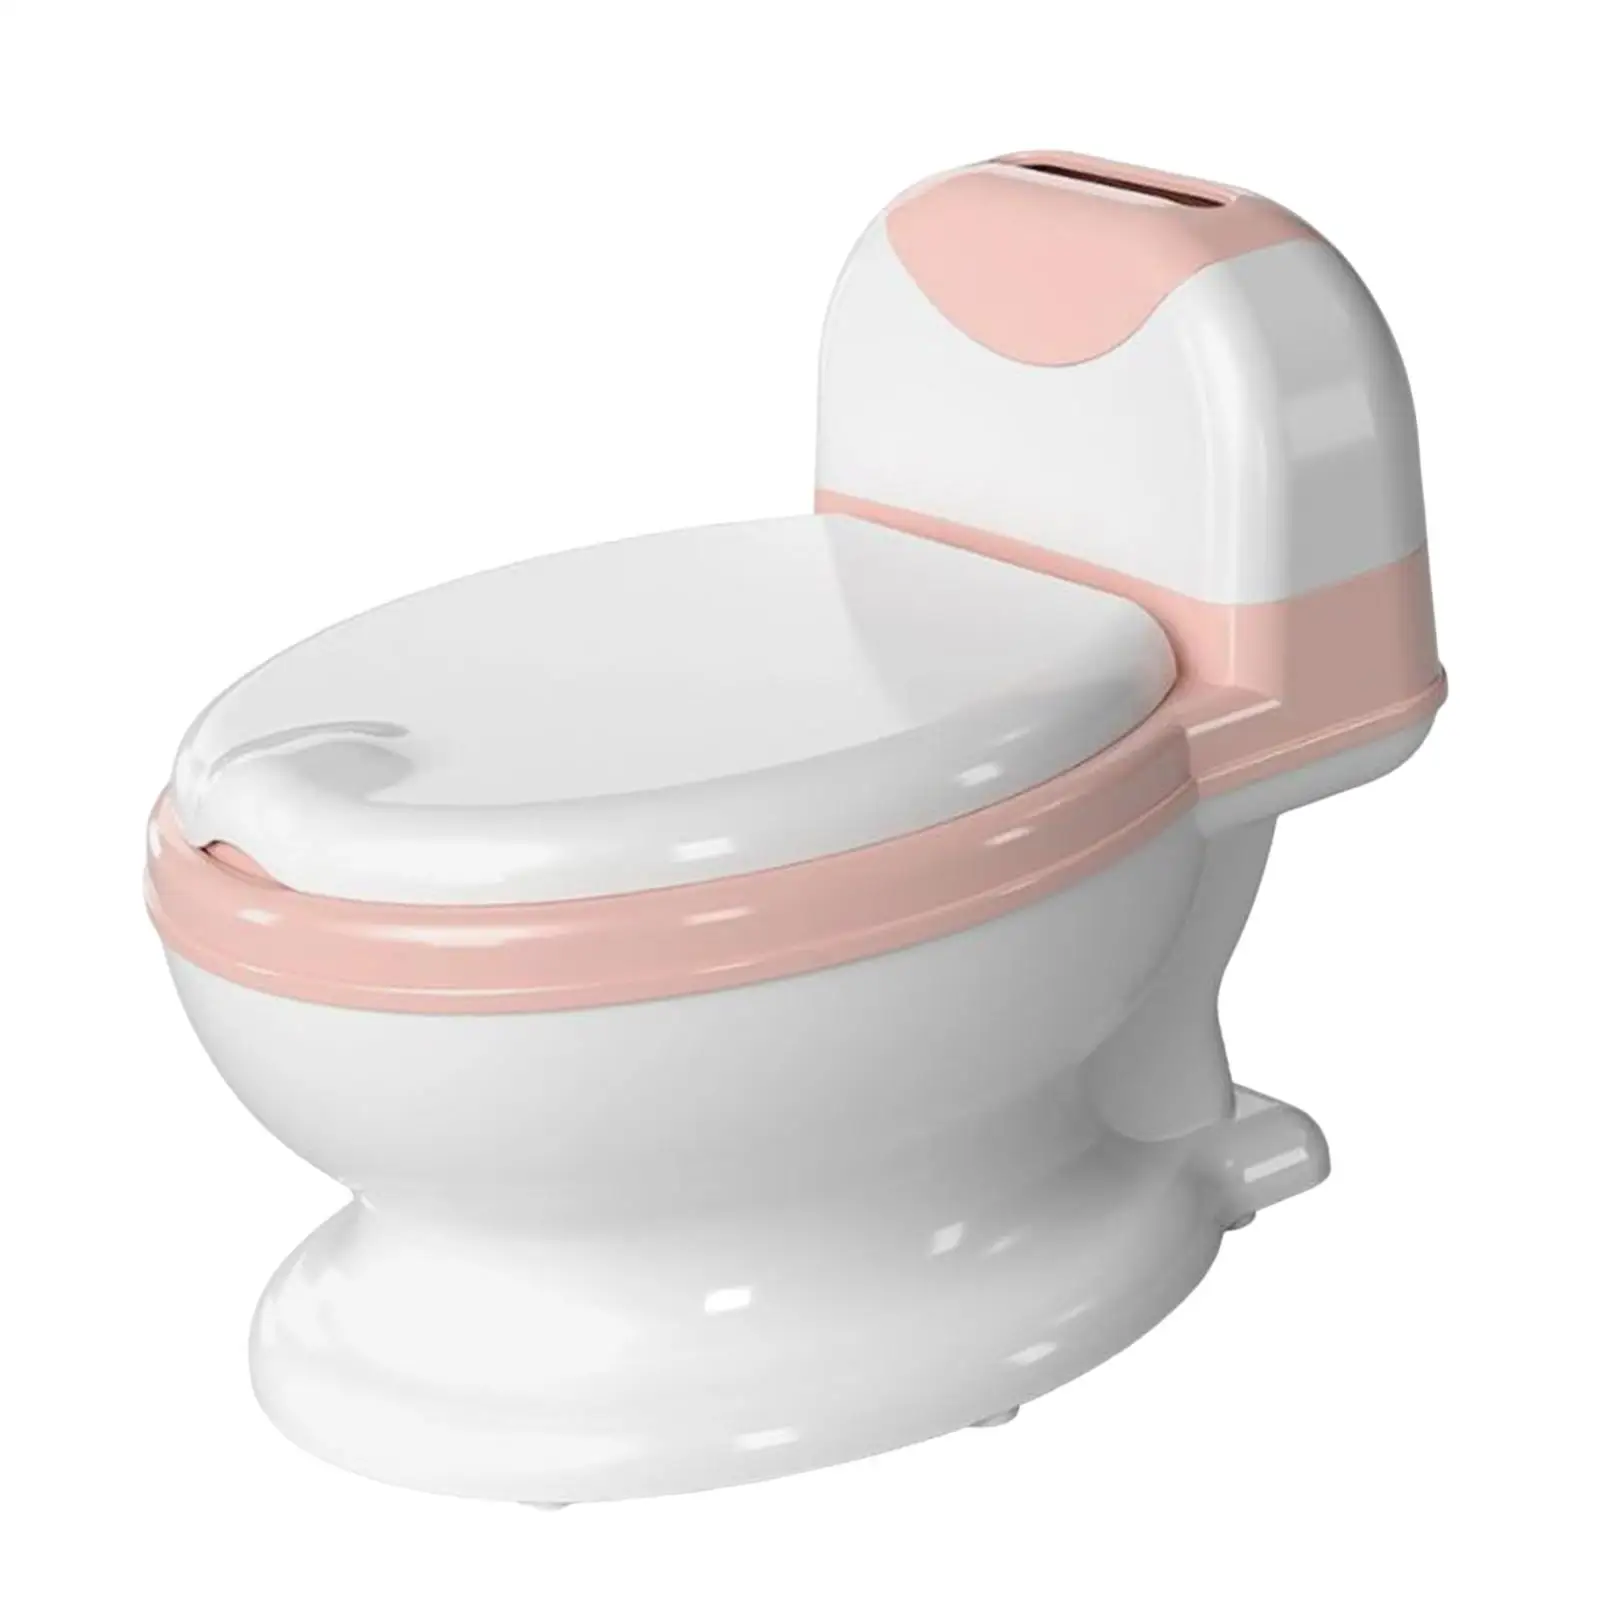 Toilet Training Potty with Wipe Storage Potty Seat Removable Potty Pot for Indoor Outdoor Travel Babies Ages 0-8